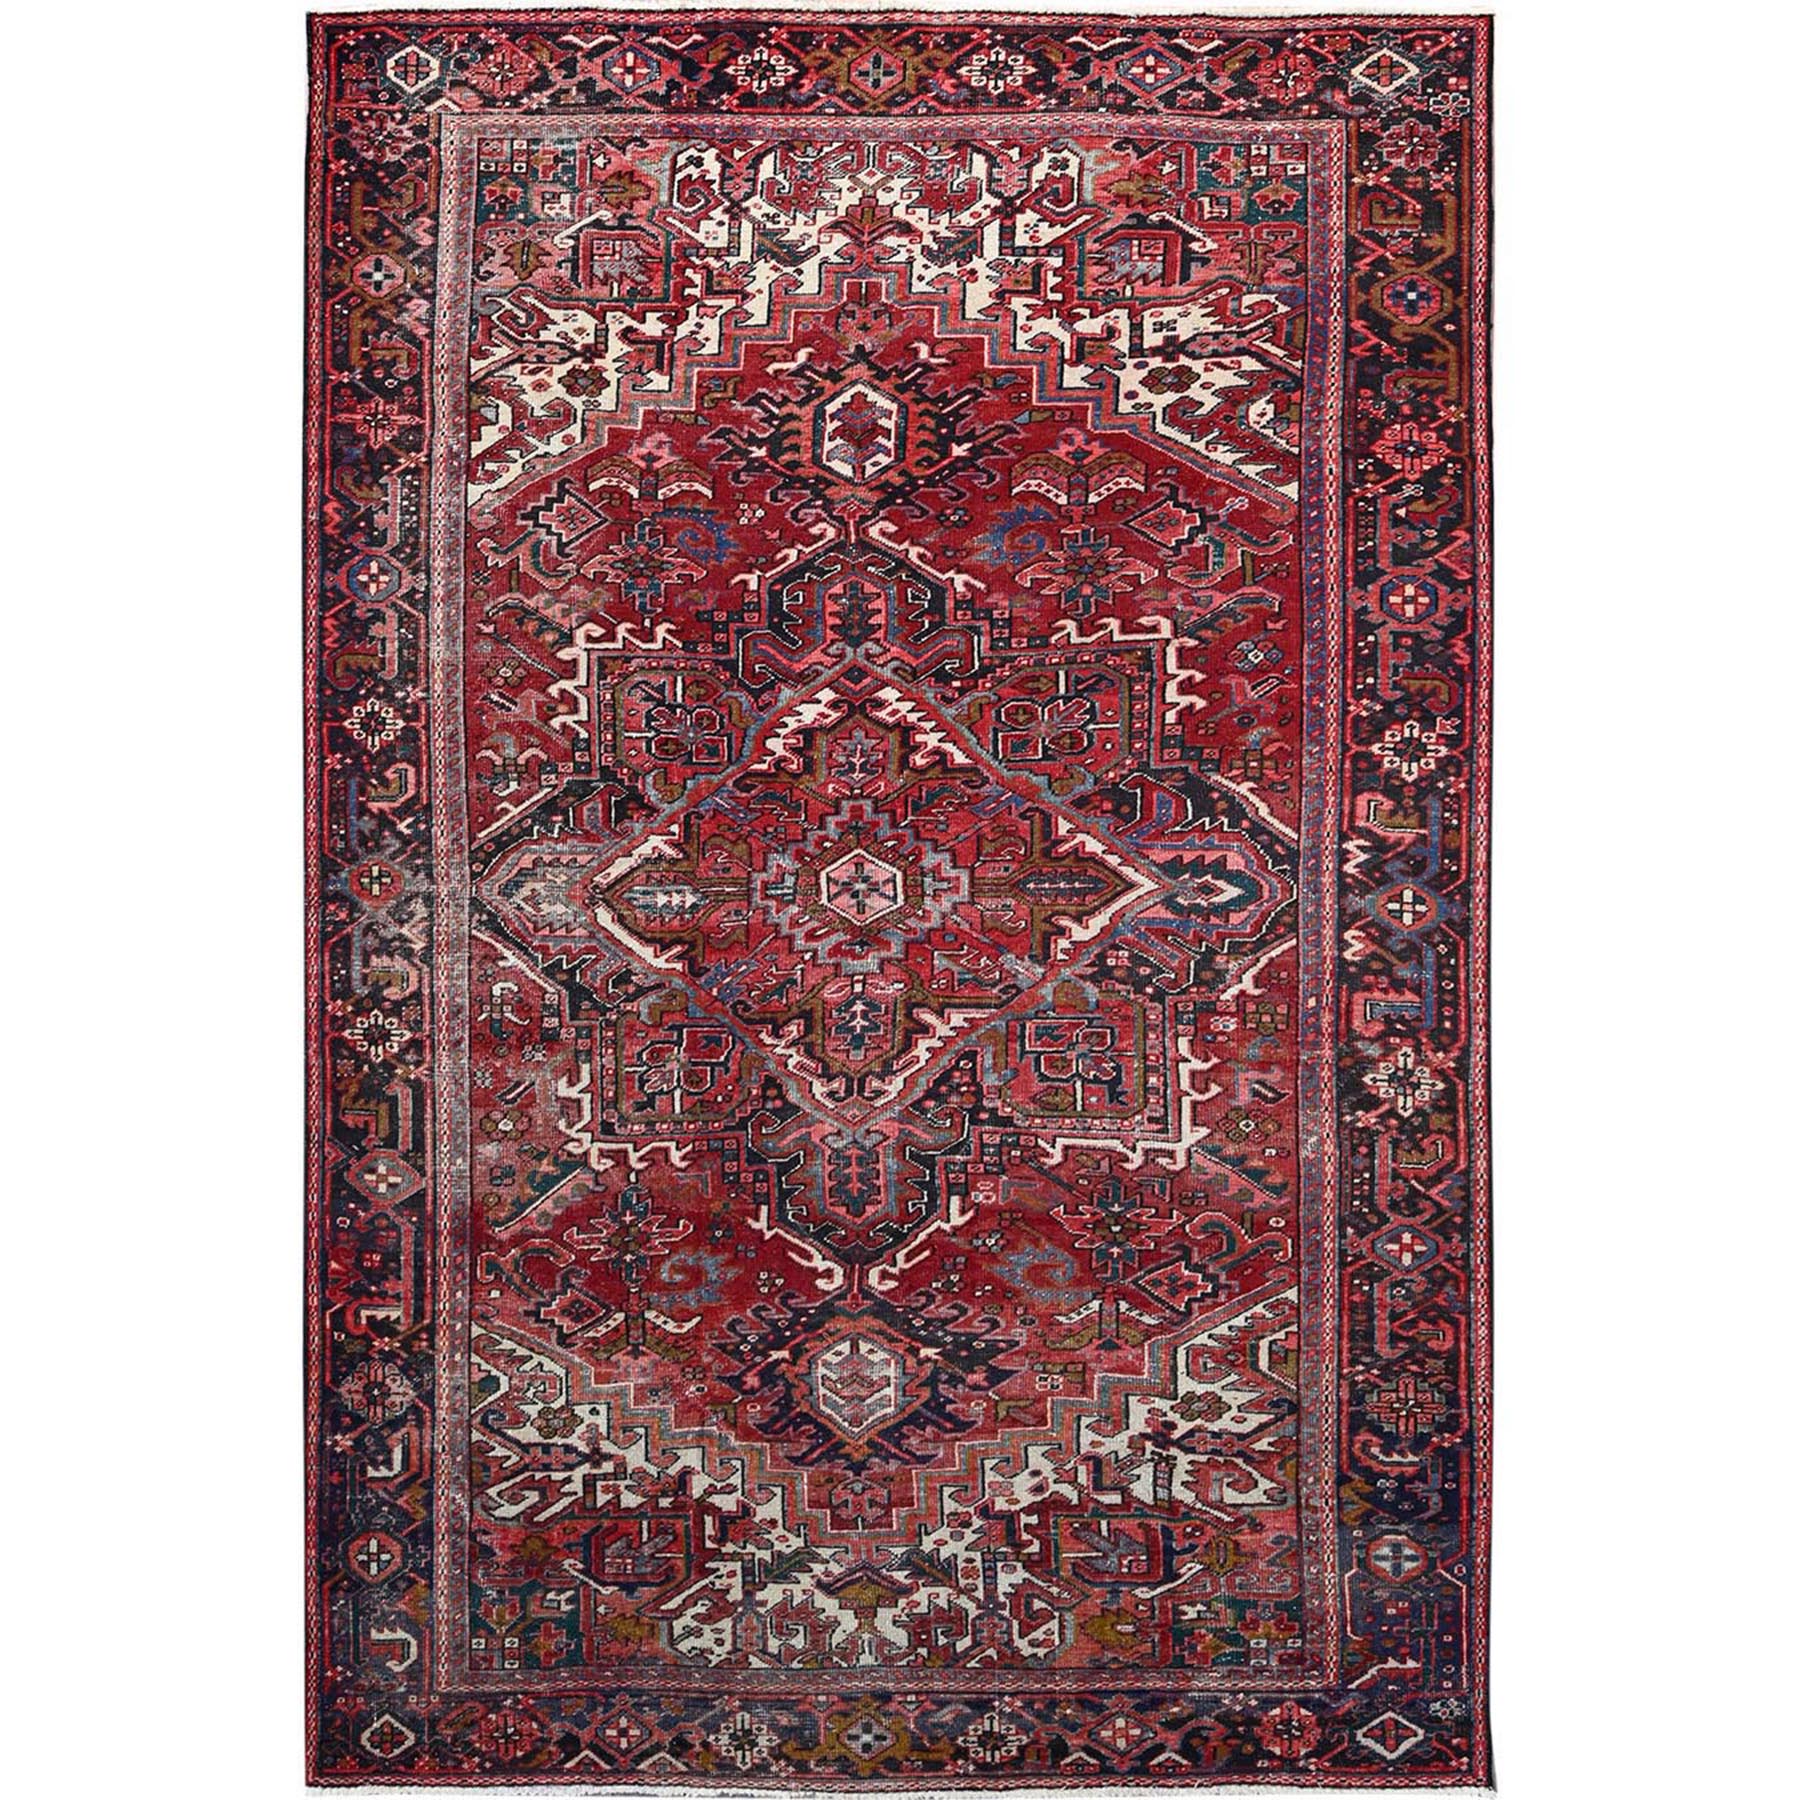  Wool Hand-Knotted Area Rug 7'6